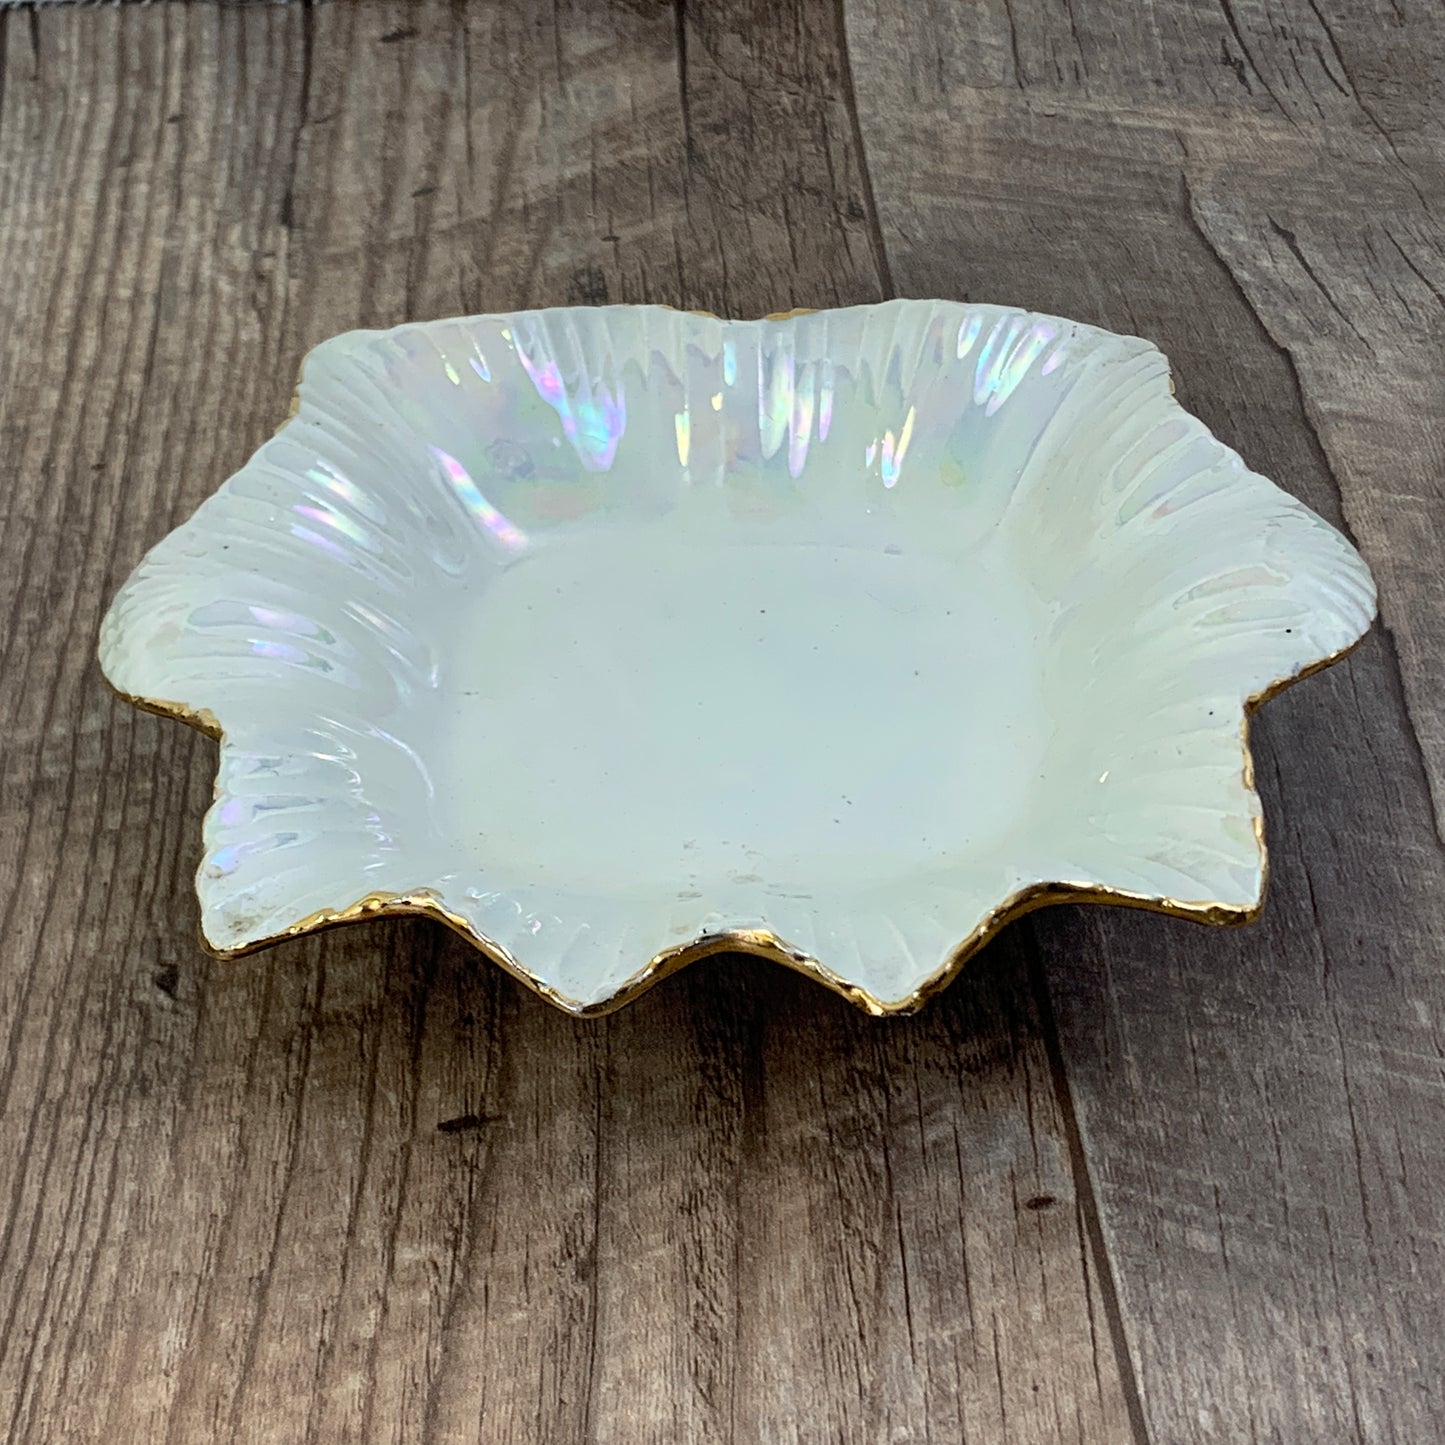 Small Luster Ware Iridescent Porcelain Dish